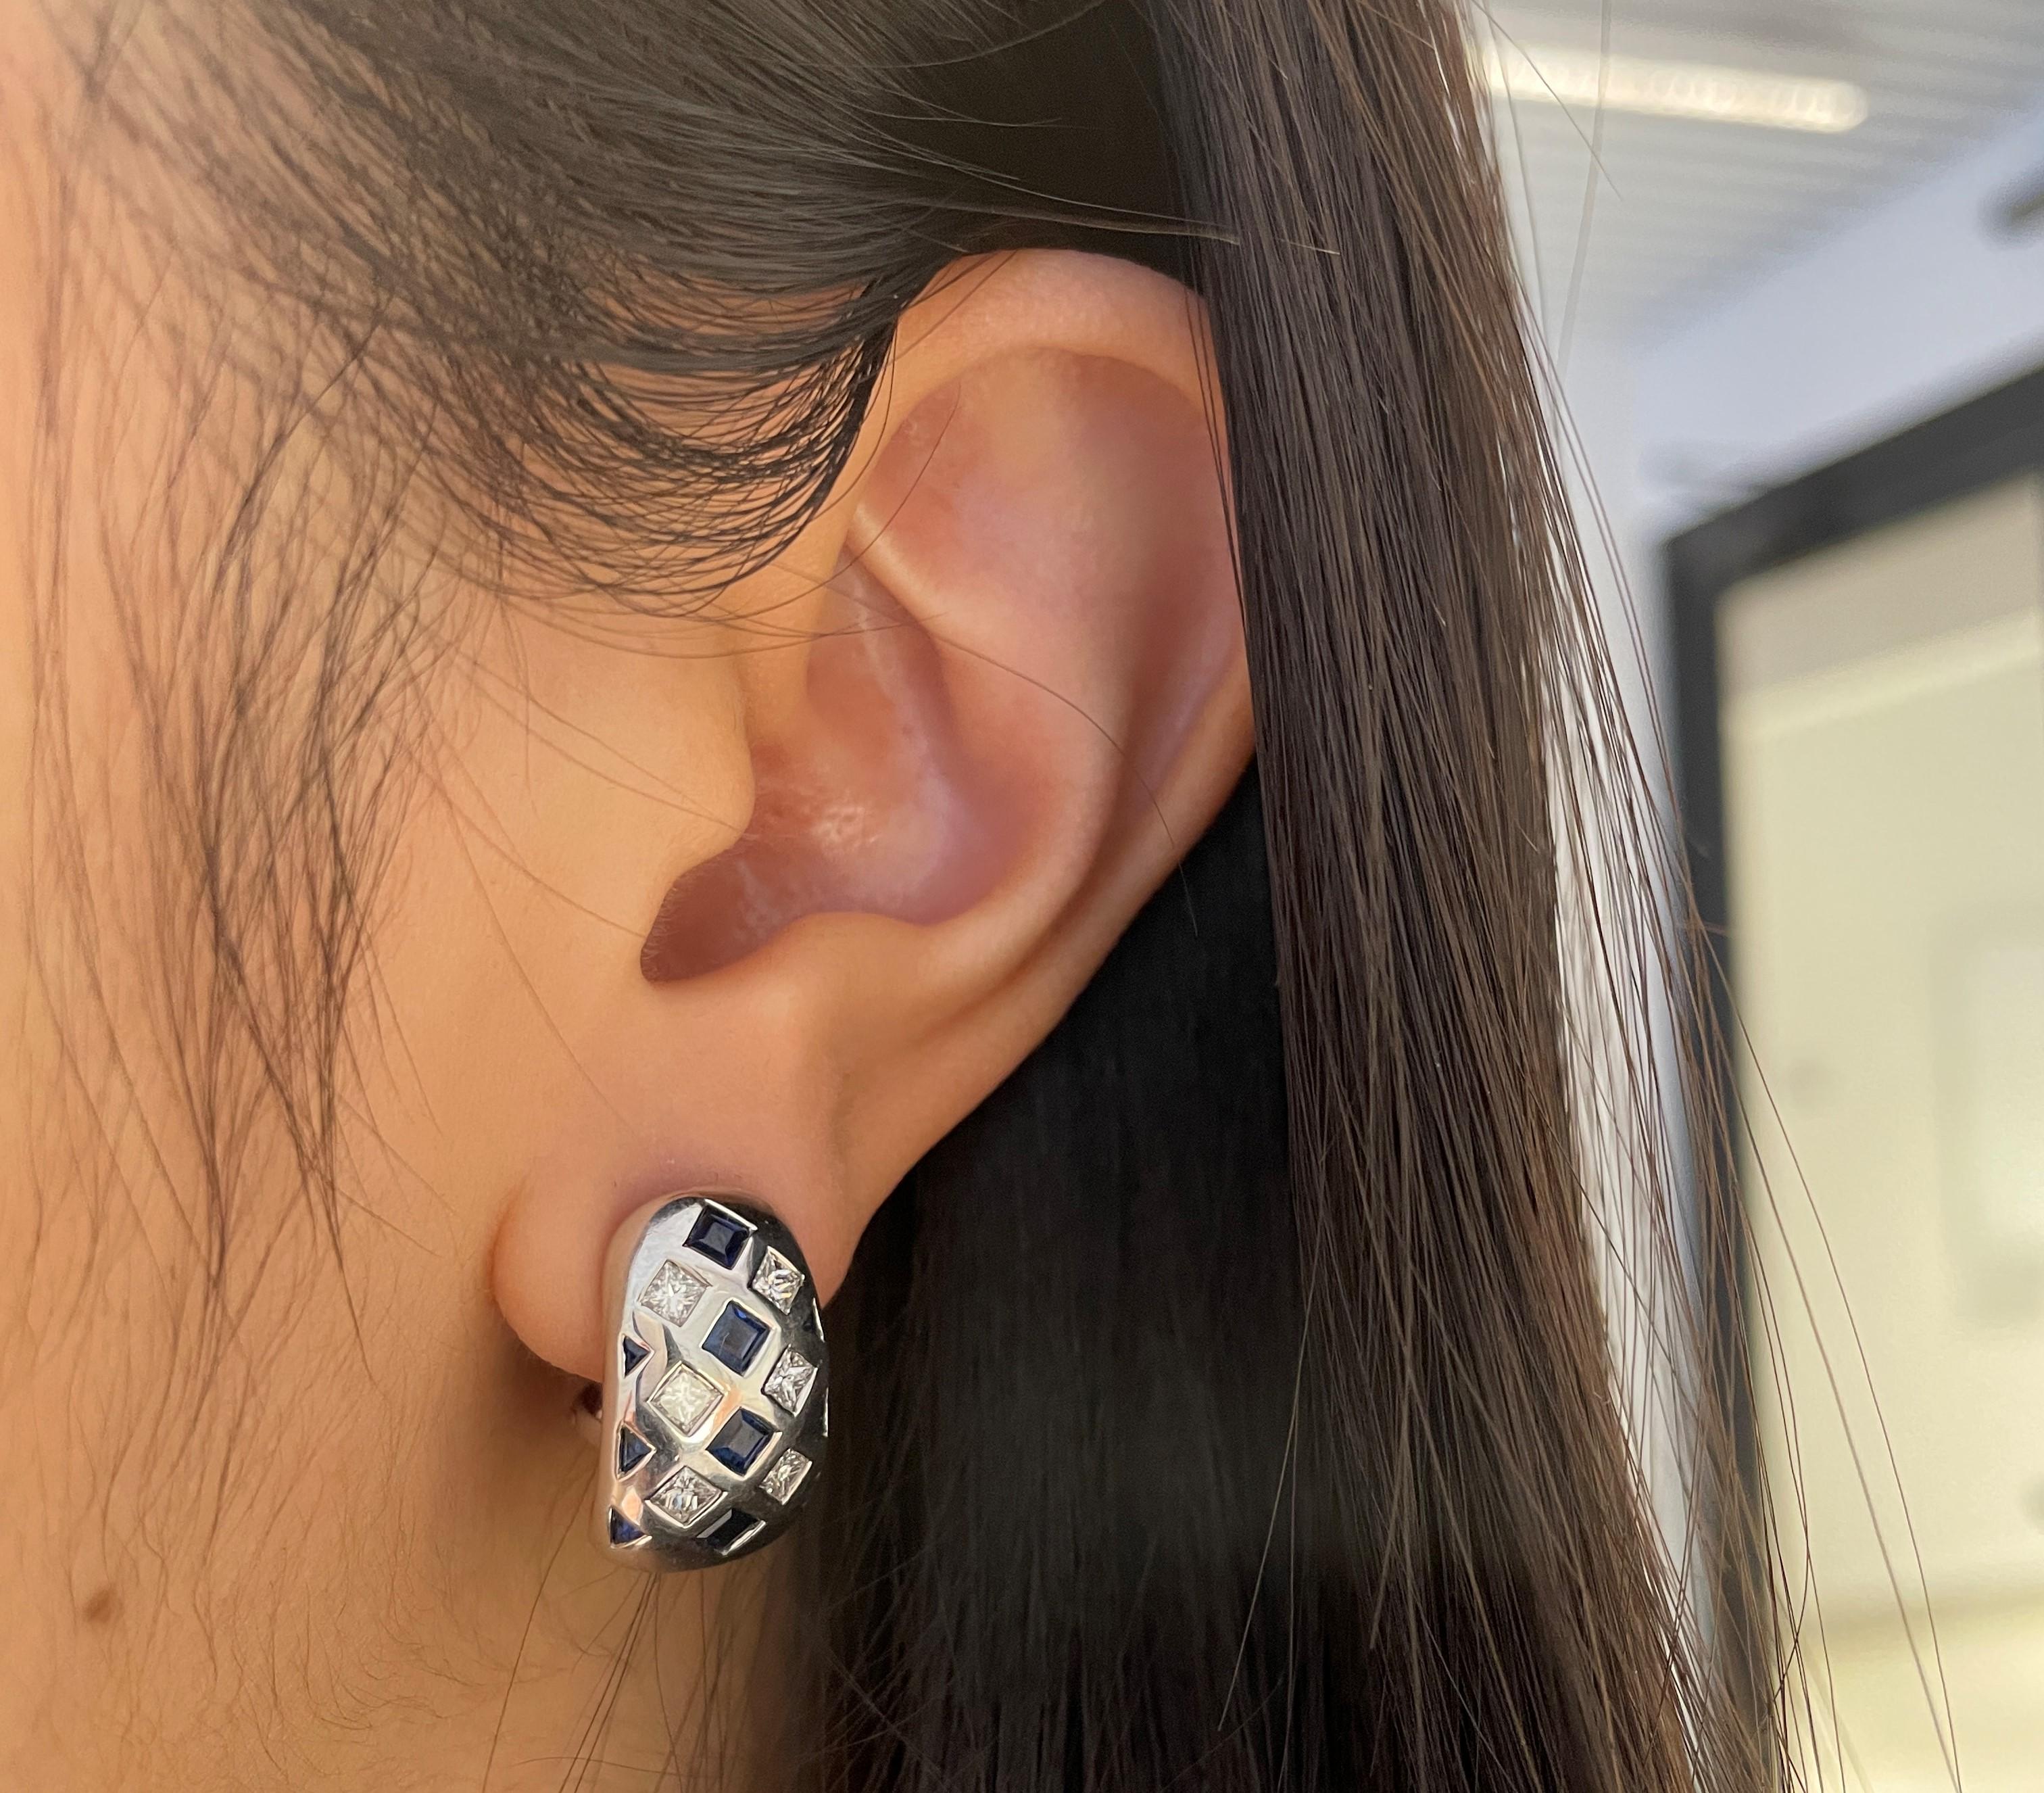 Those Omega Clip Earrings crafted in Platinum features 12 princess cut diamonds for a total weight of 0.89-carat and 8 Princess cut blue sapphires for a total weight of 1.48-carat.

Those earrings are stamped 'PT950'

Type: Omega Clip